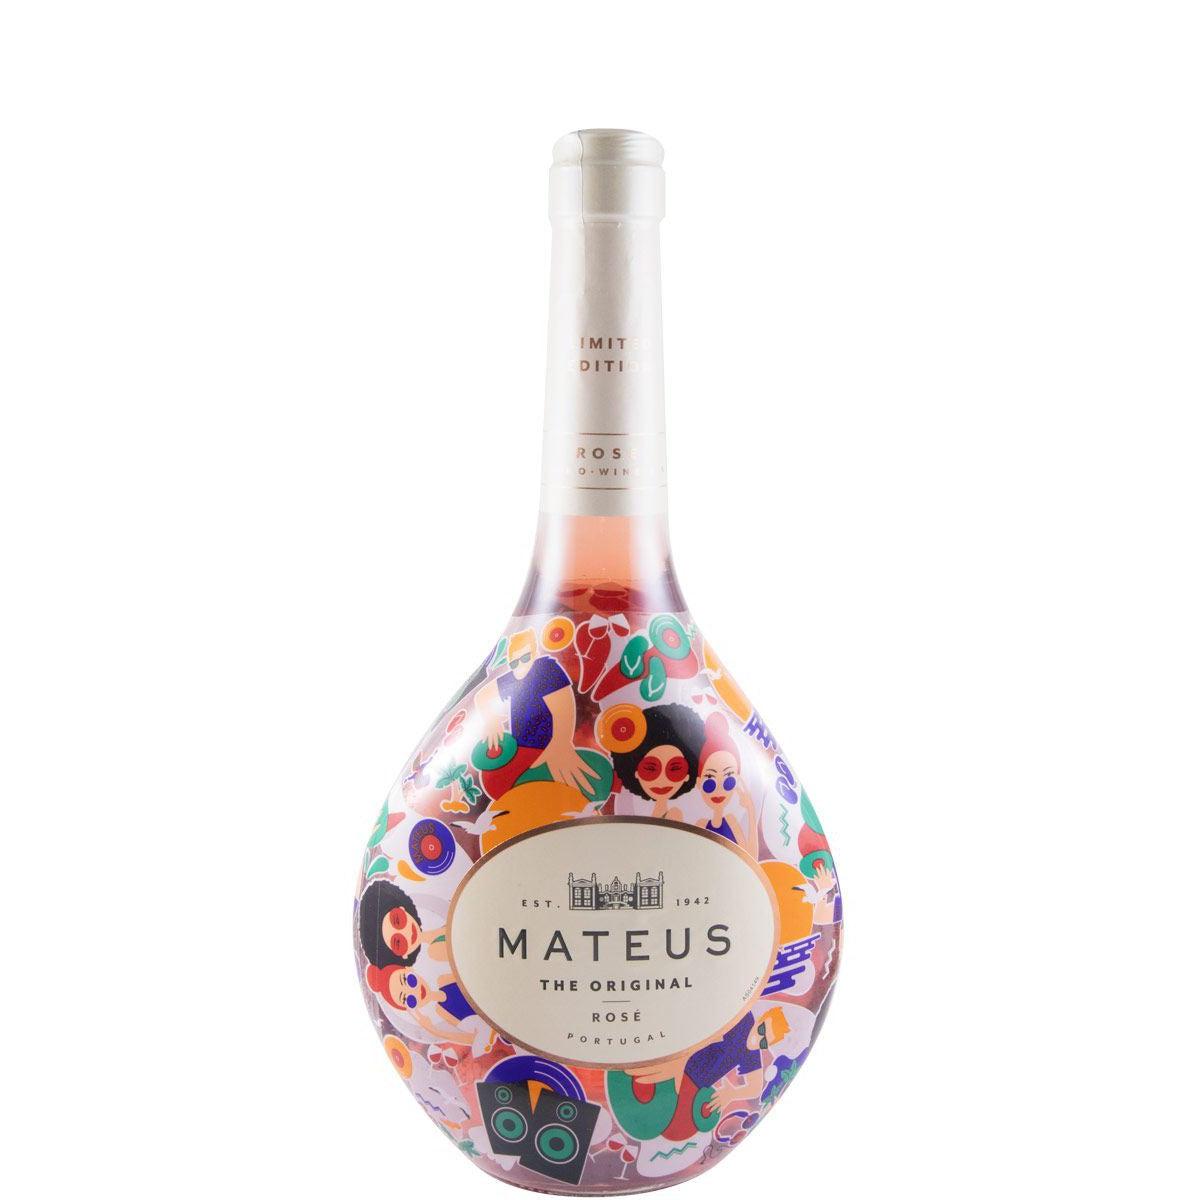 Mateus Rosé 80 Year Edition Limited Edition 750ml